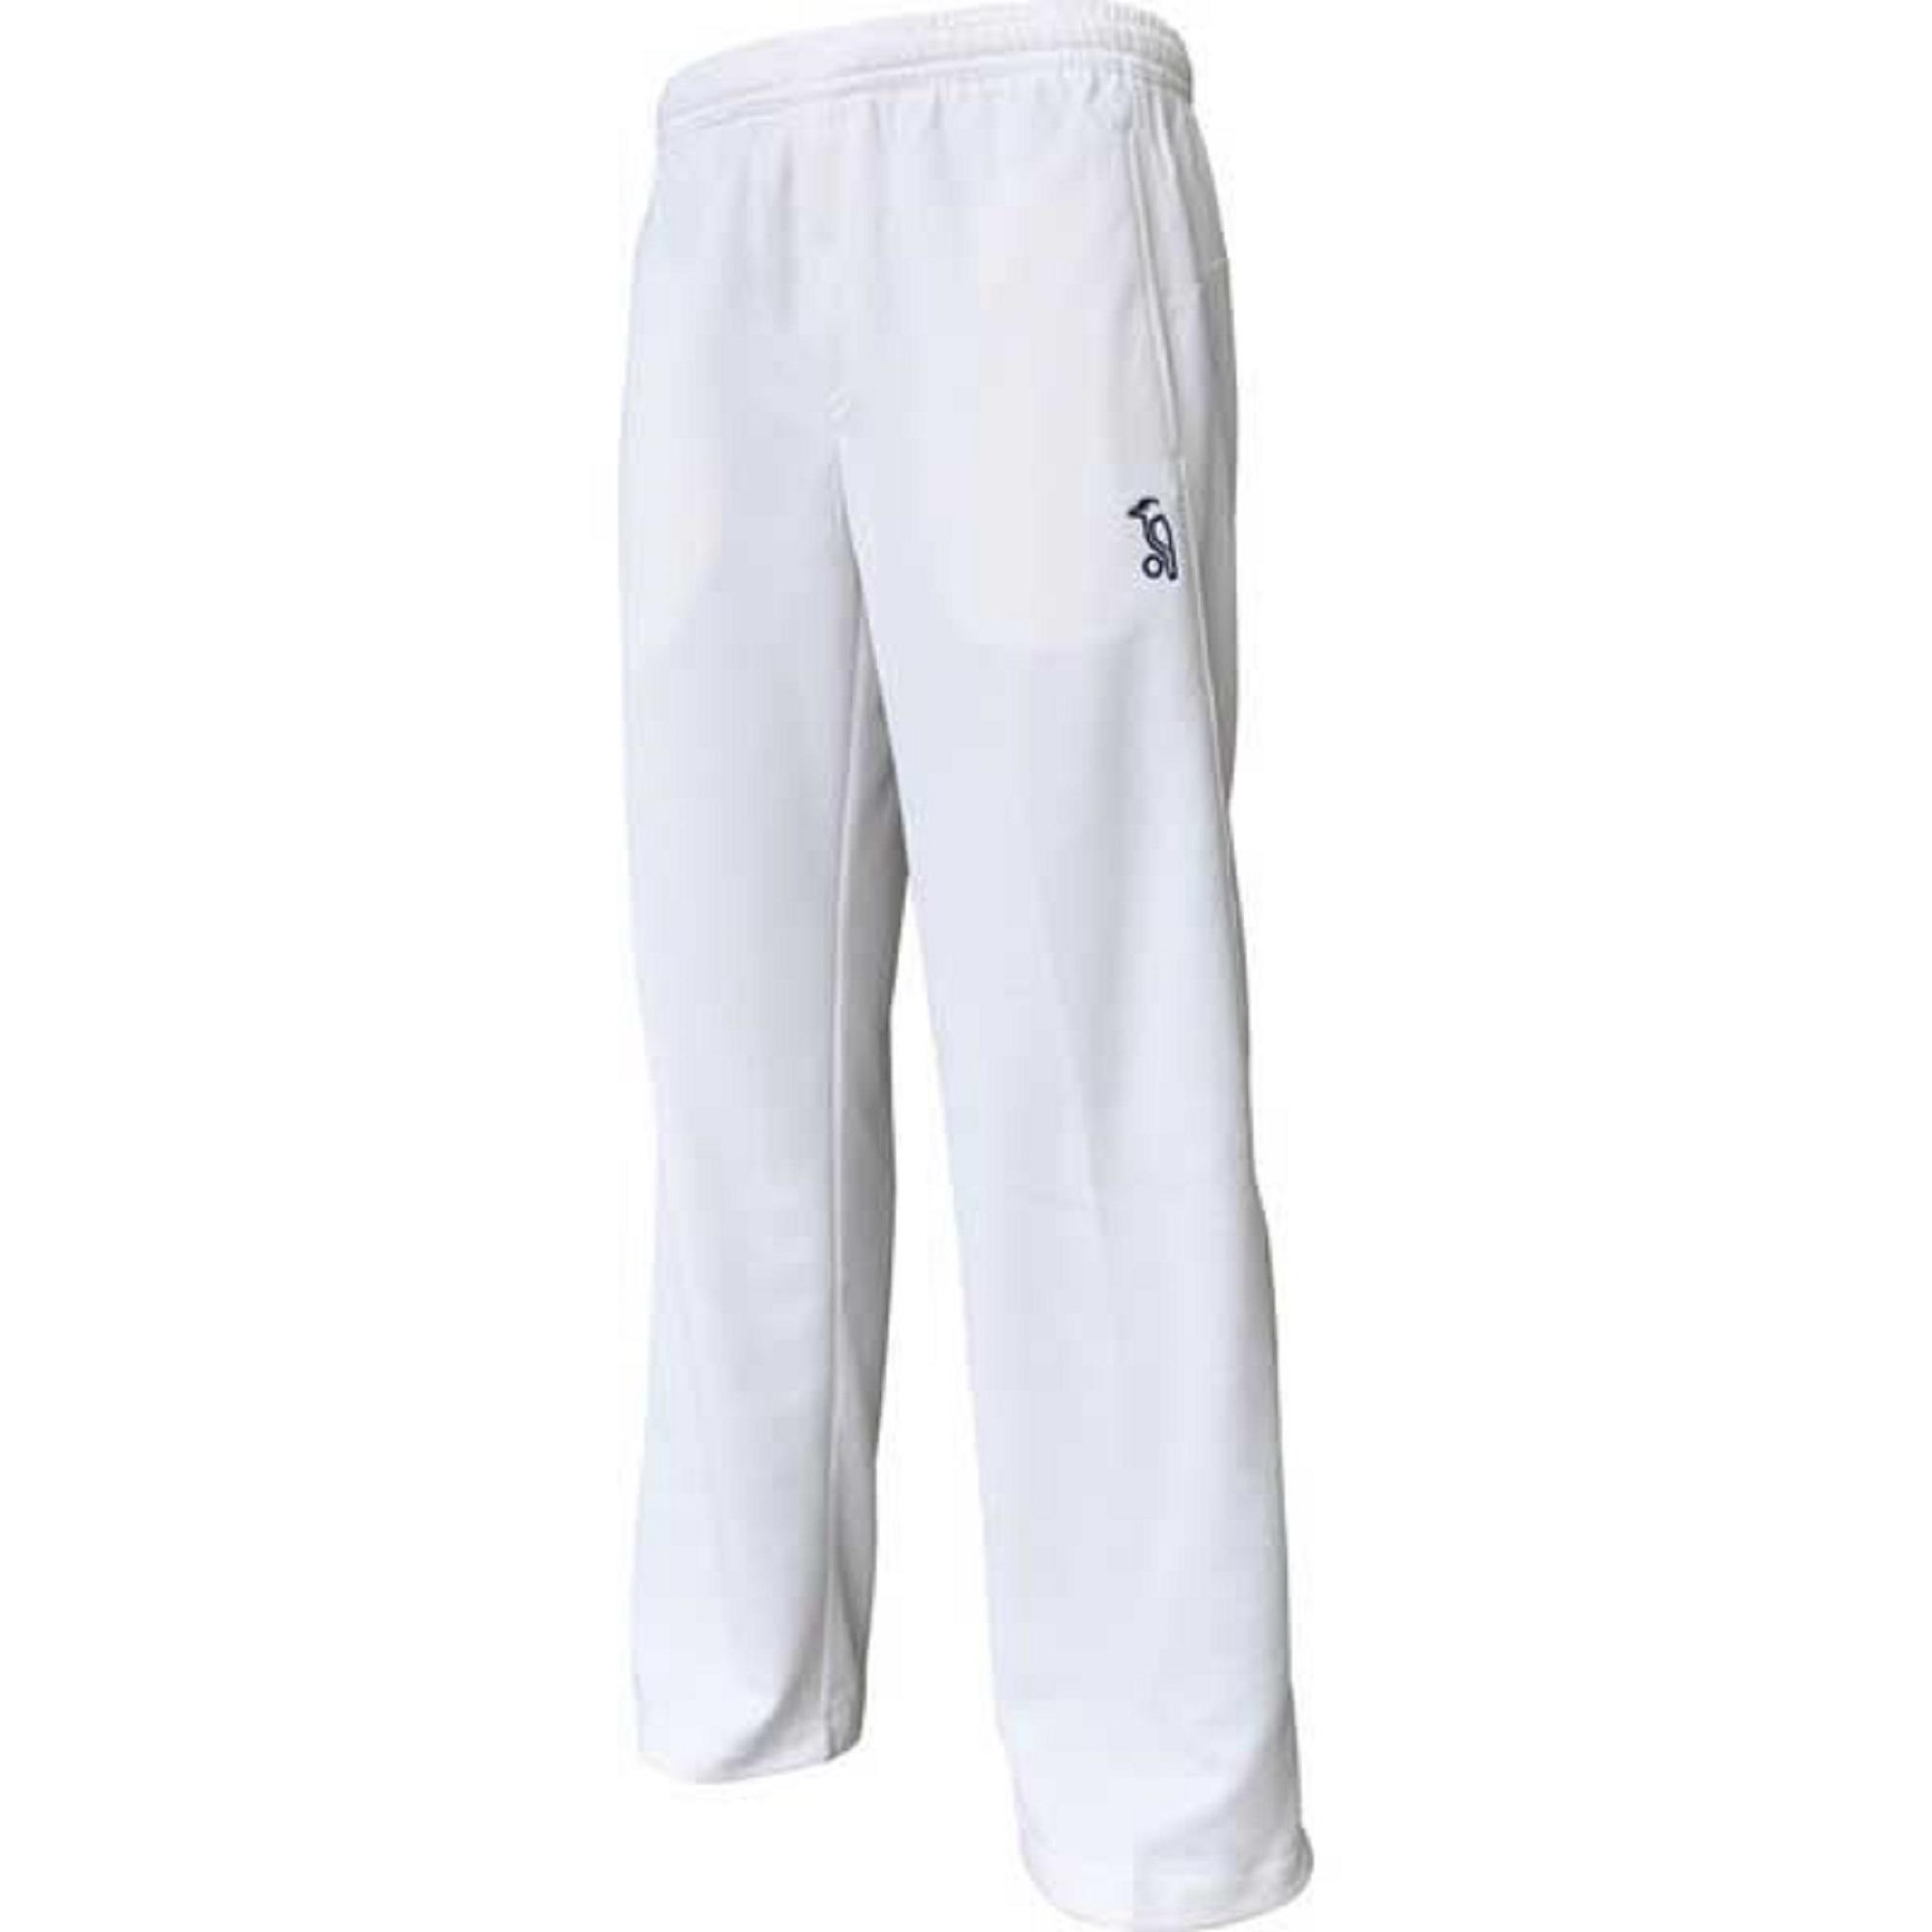 Pro Player Kids cricket trousers 